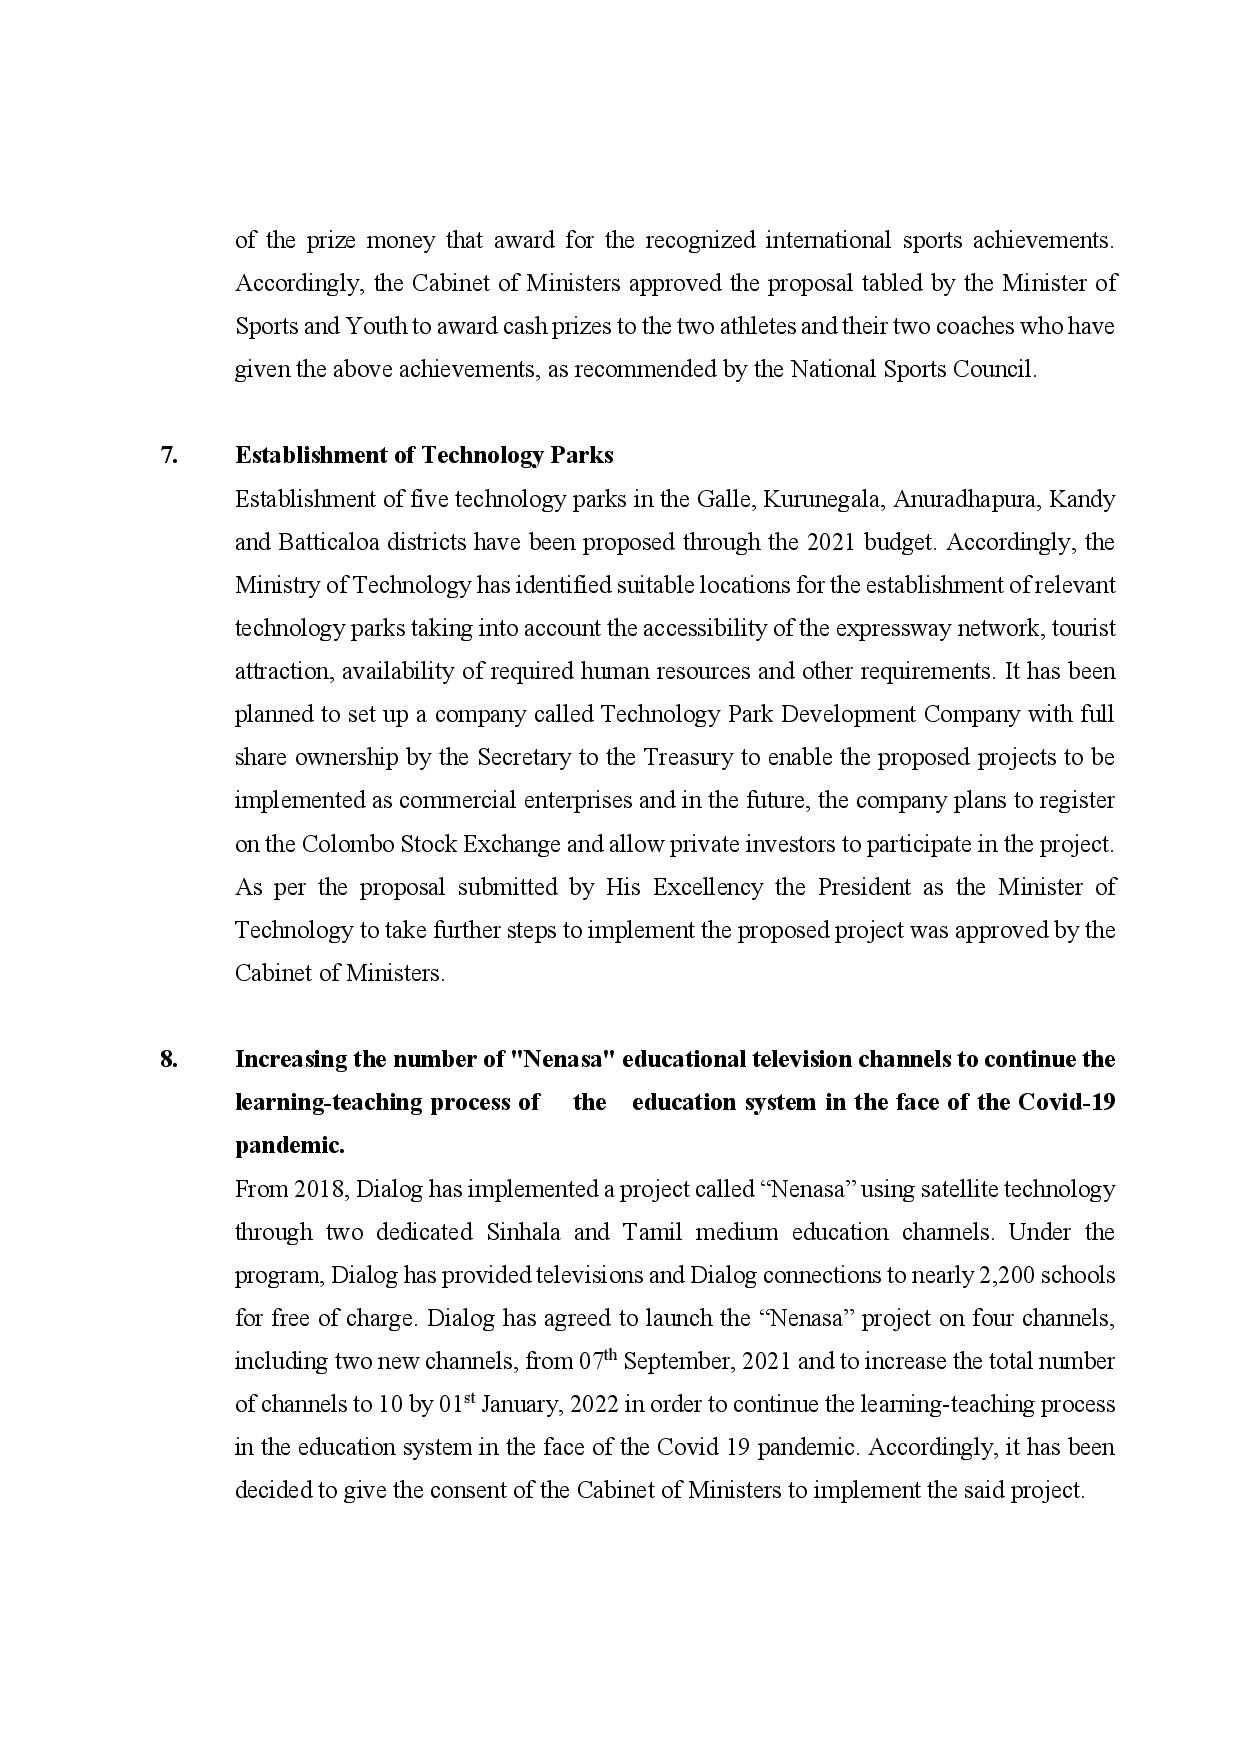 Cabinet Decisions on 06.09.2021 English page 004